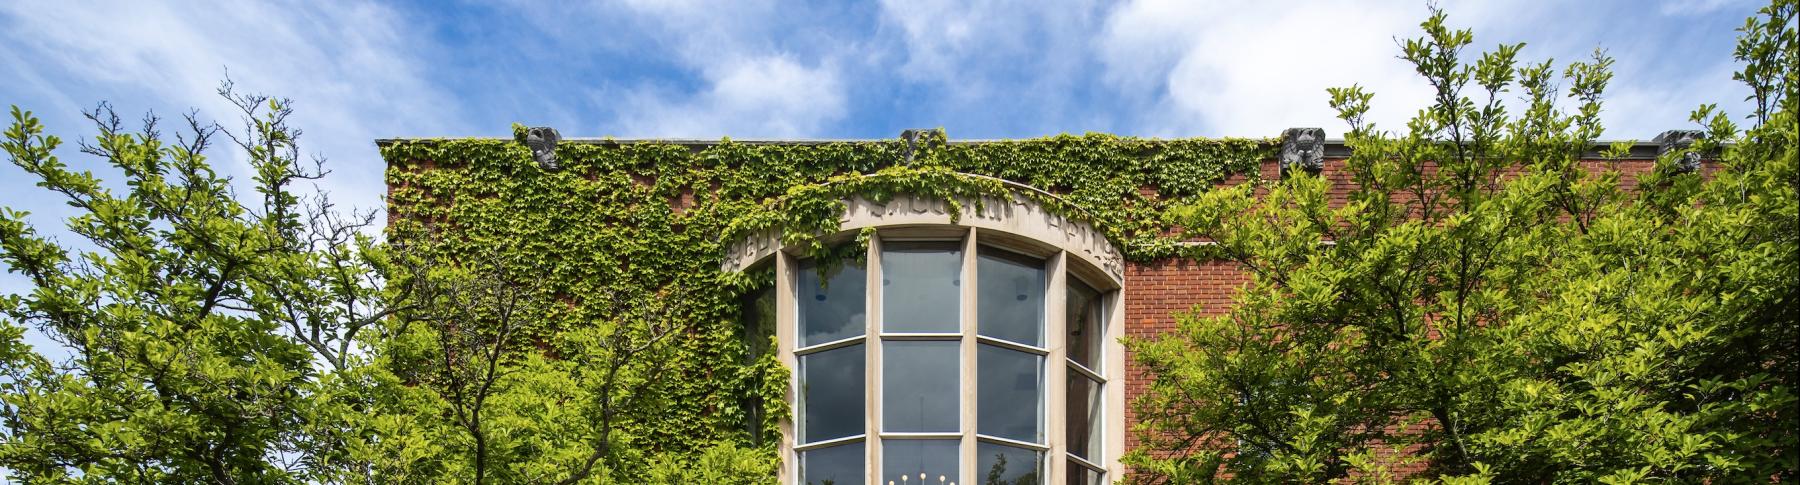 corwin hall covered in ivy